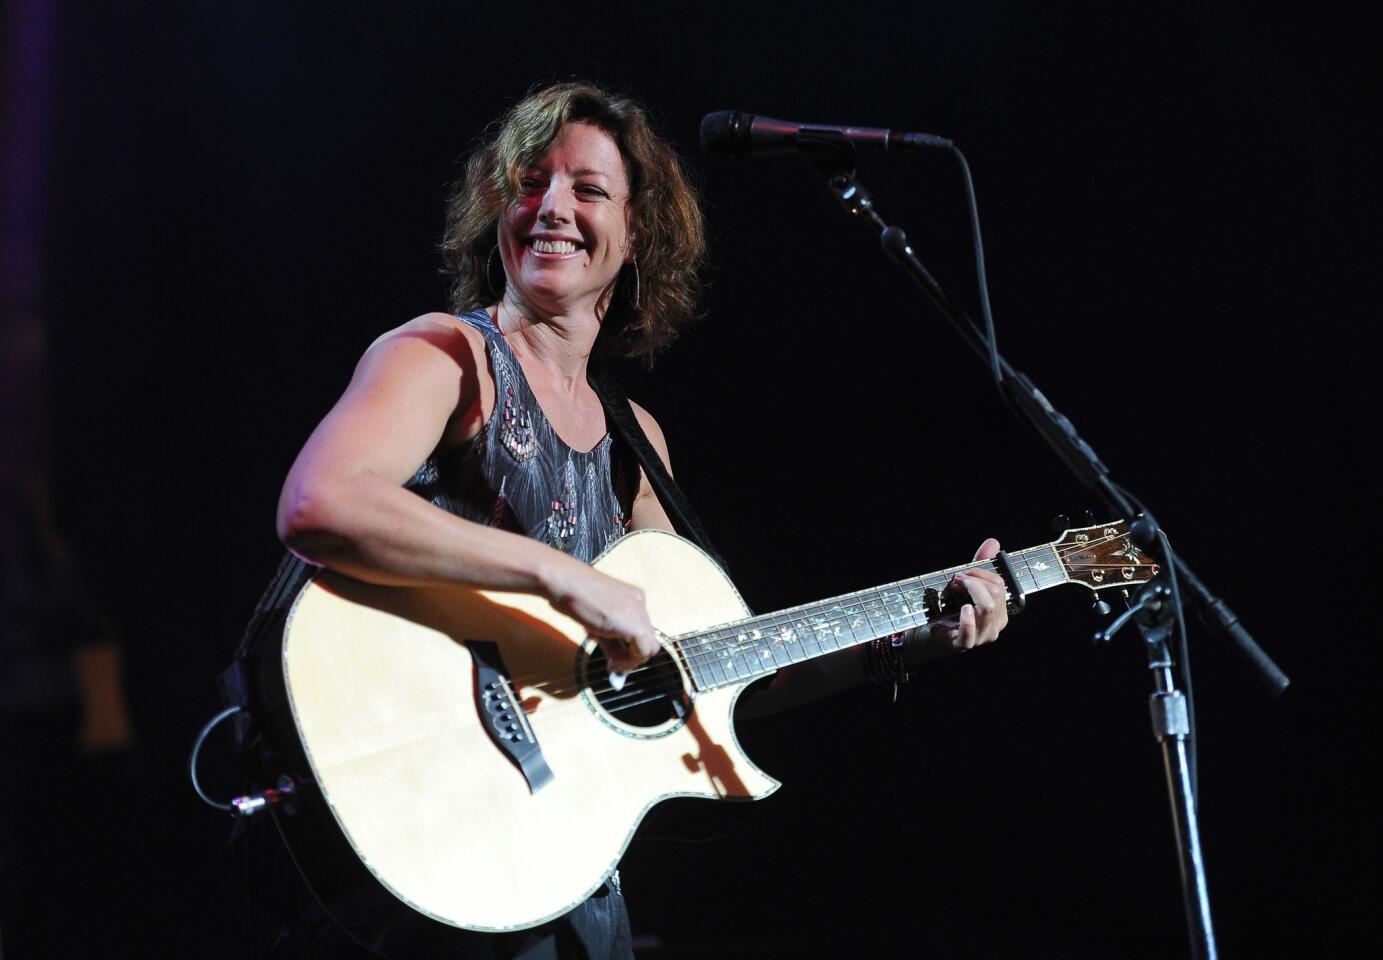 Sarah McLachlan gets in tune with her guitar at the ELLE fifth annual Women in Music concert celebration.